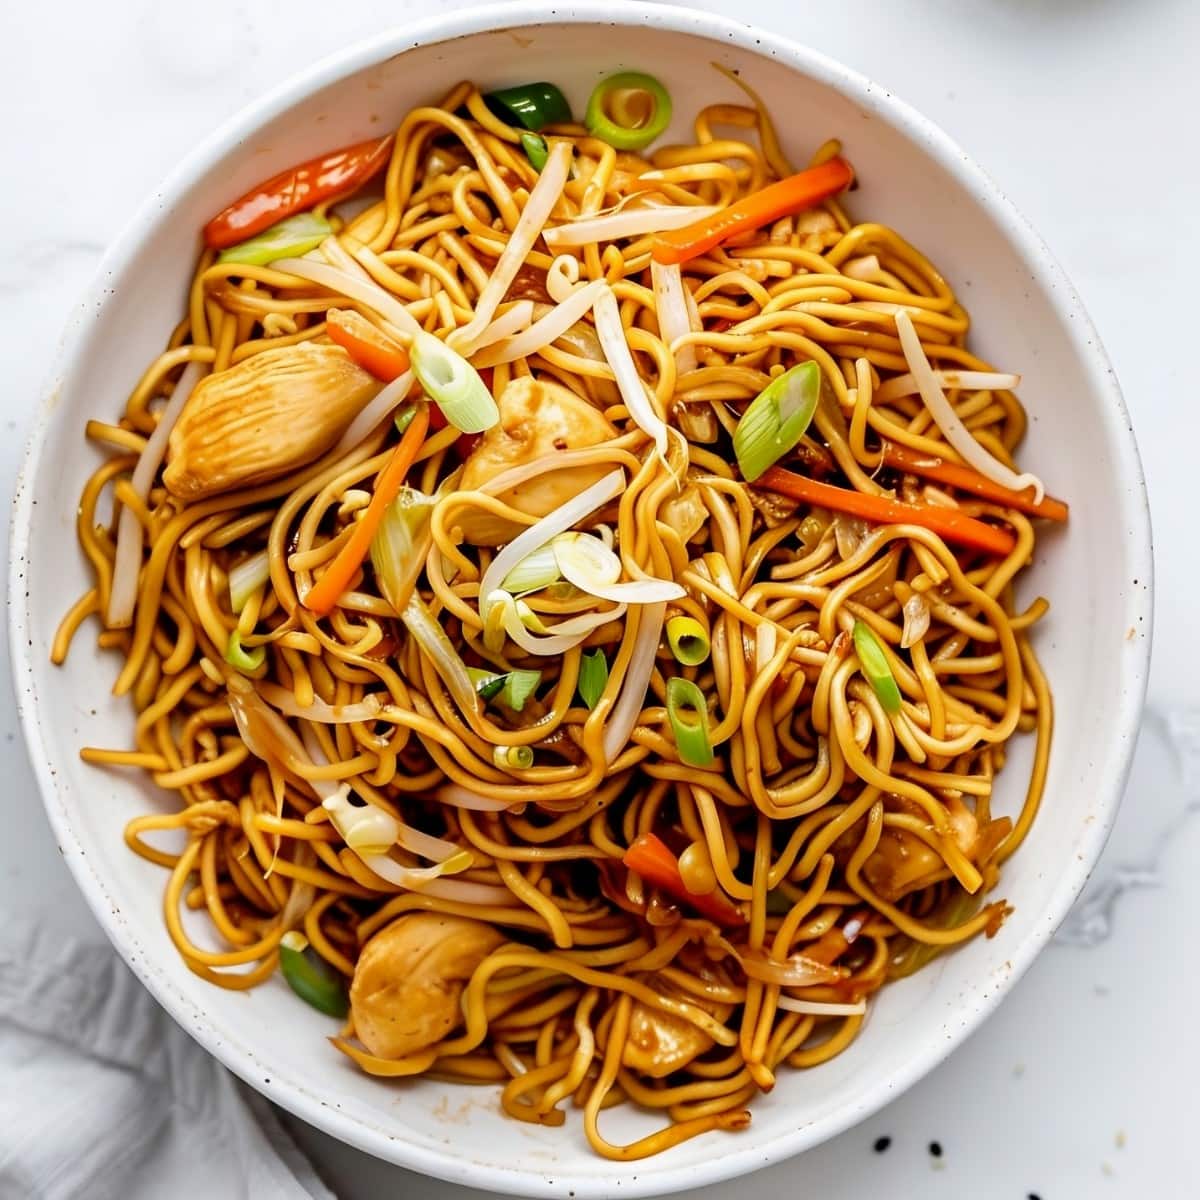 A bowl of chow mein noodles with chicken, carrots, onions and bean sprouts